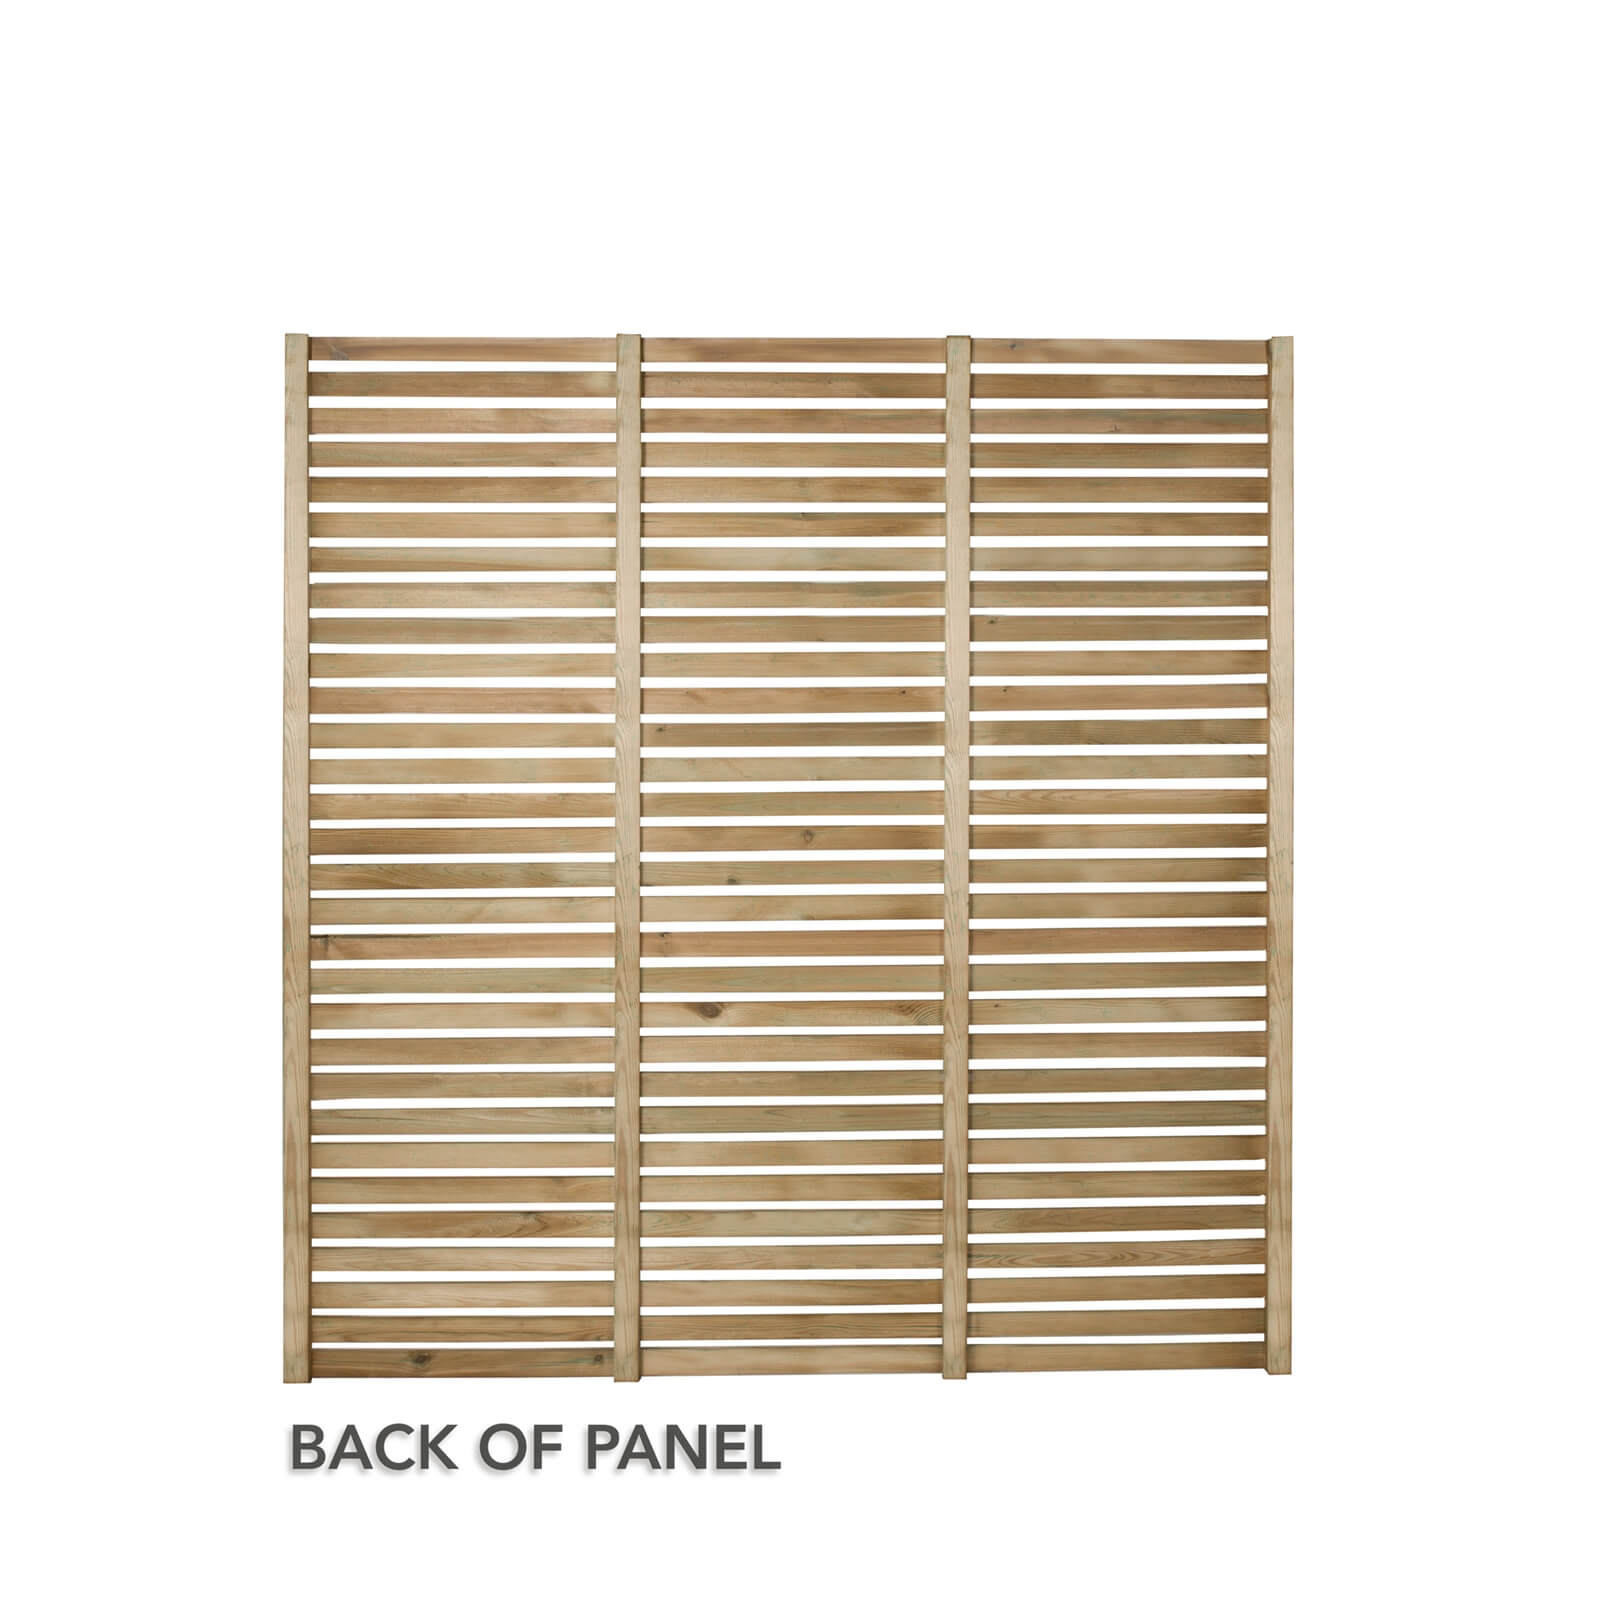 Forest Slatted Fence Panel - 6ft - Pack of 3